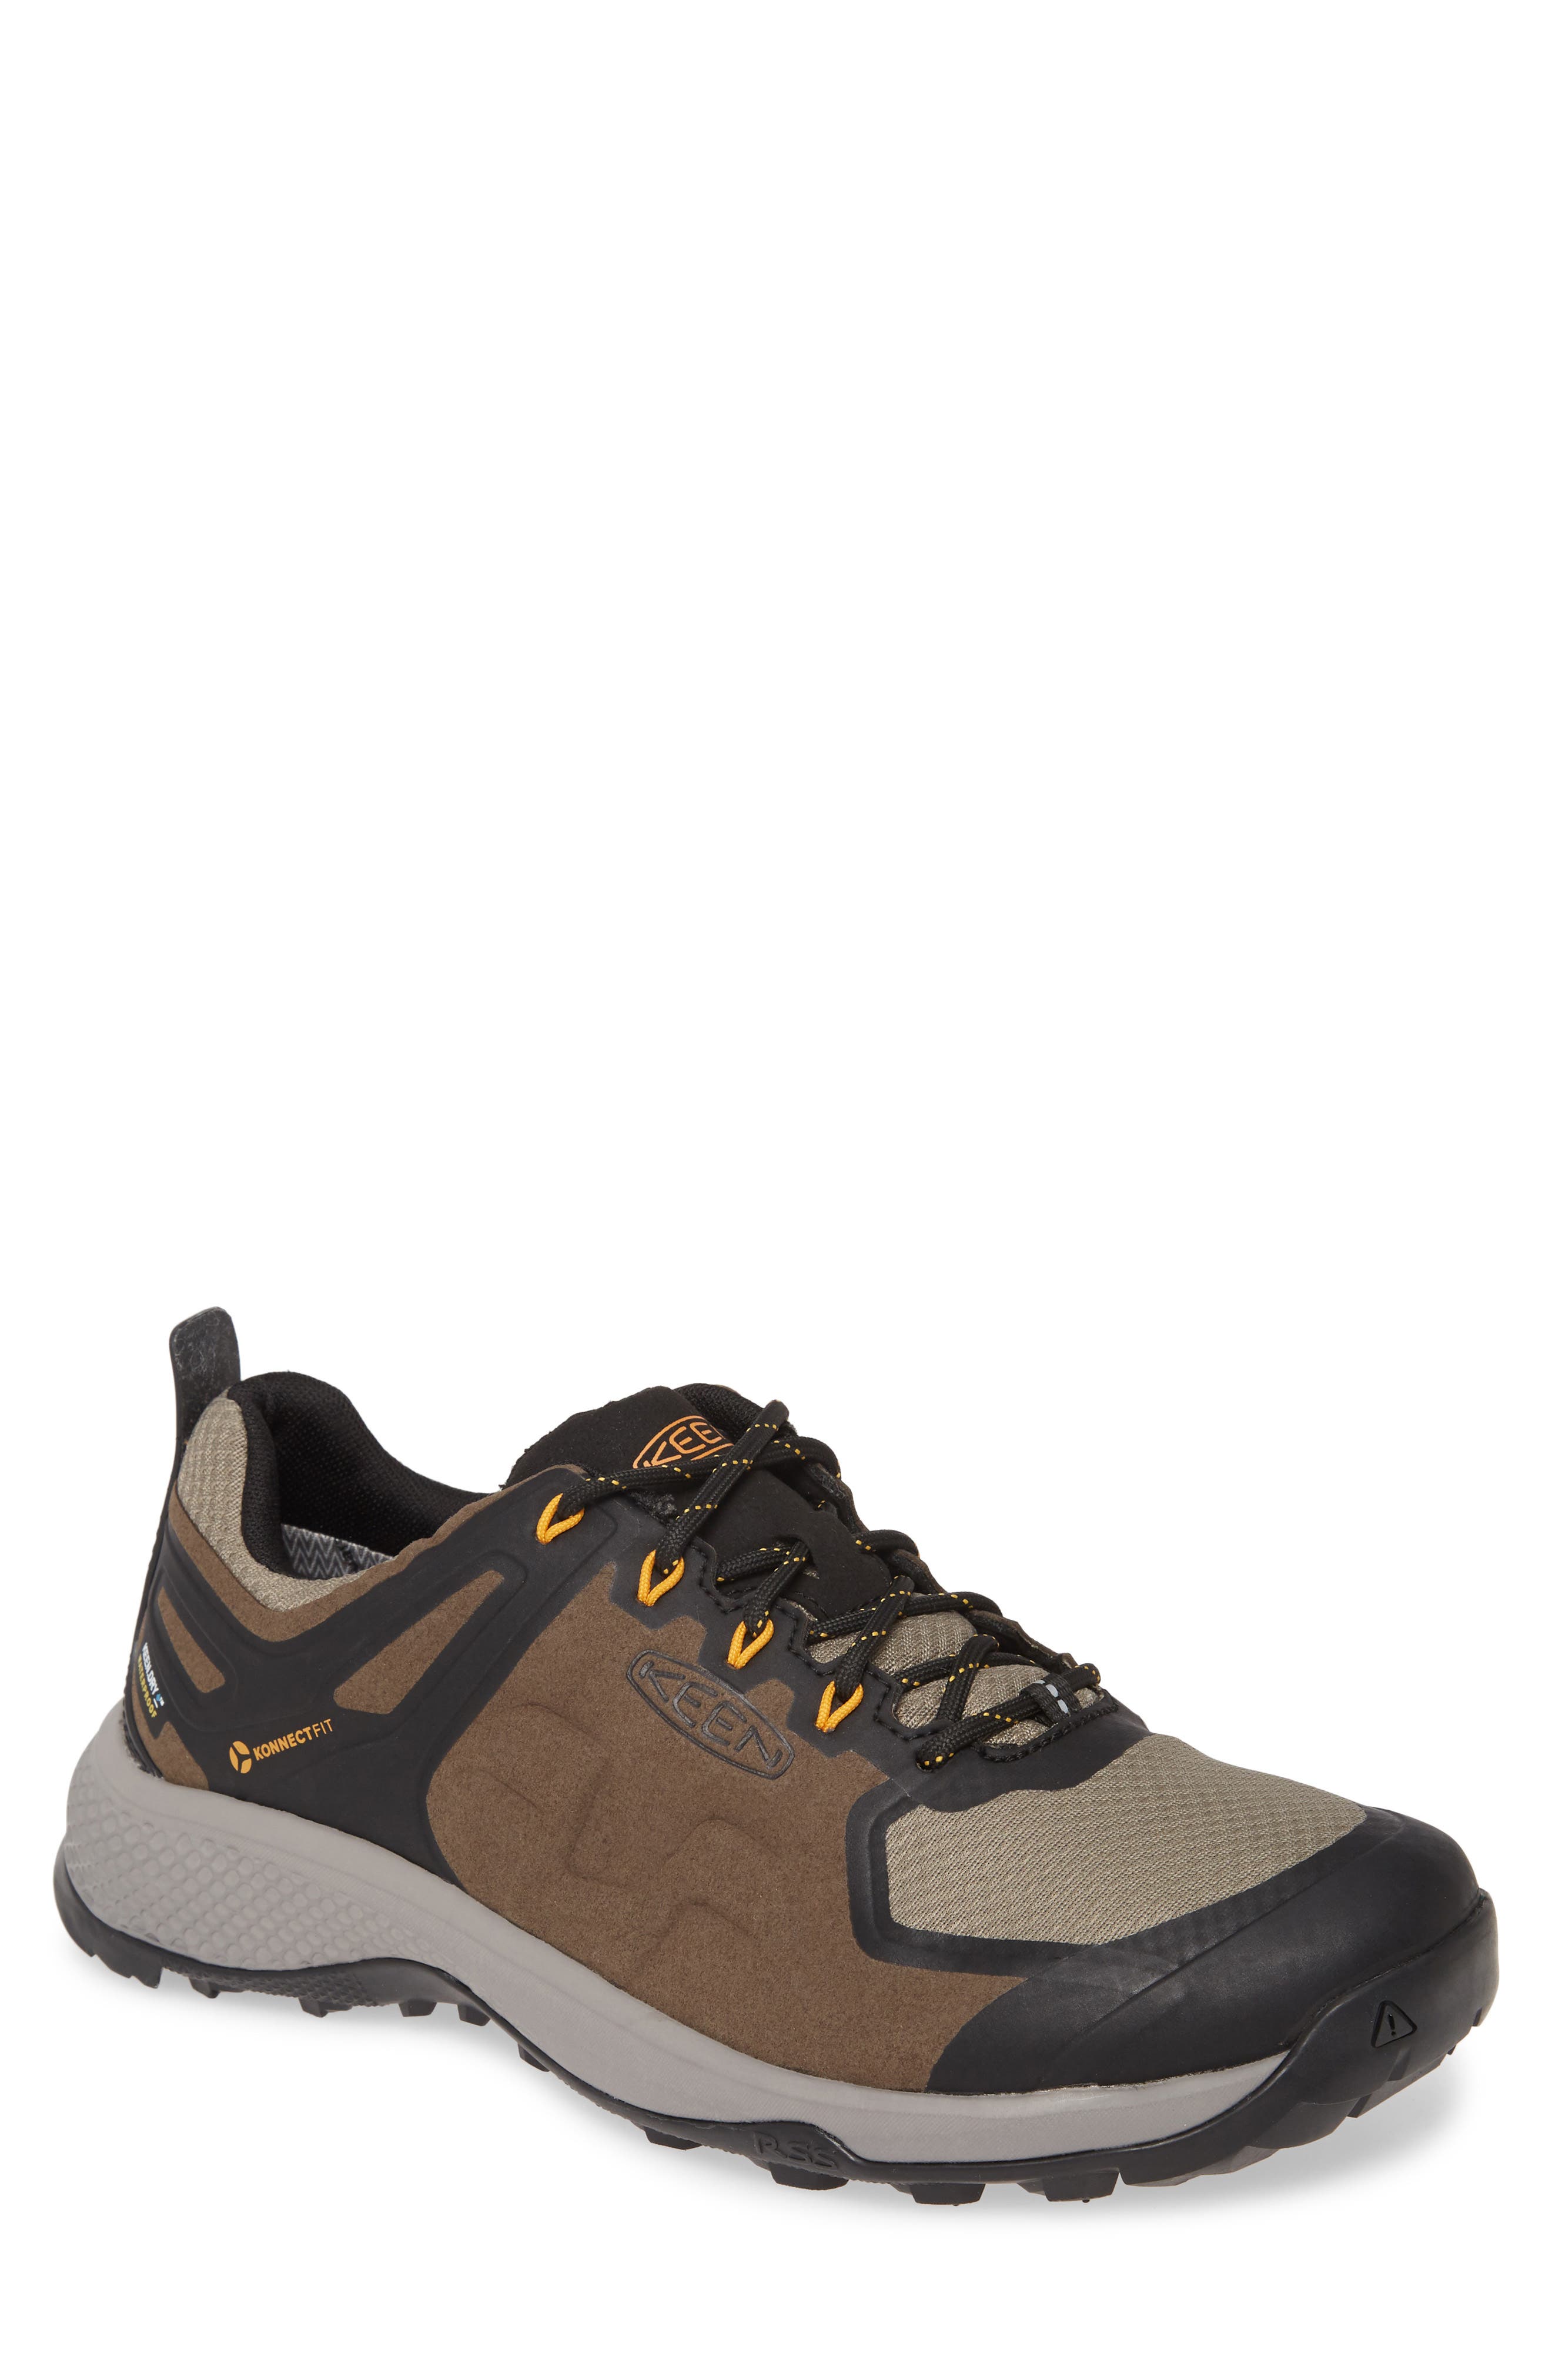 keen mens shoes clearance